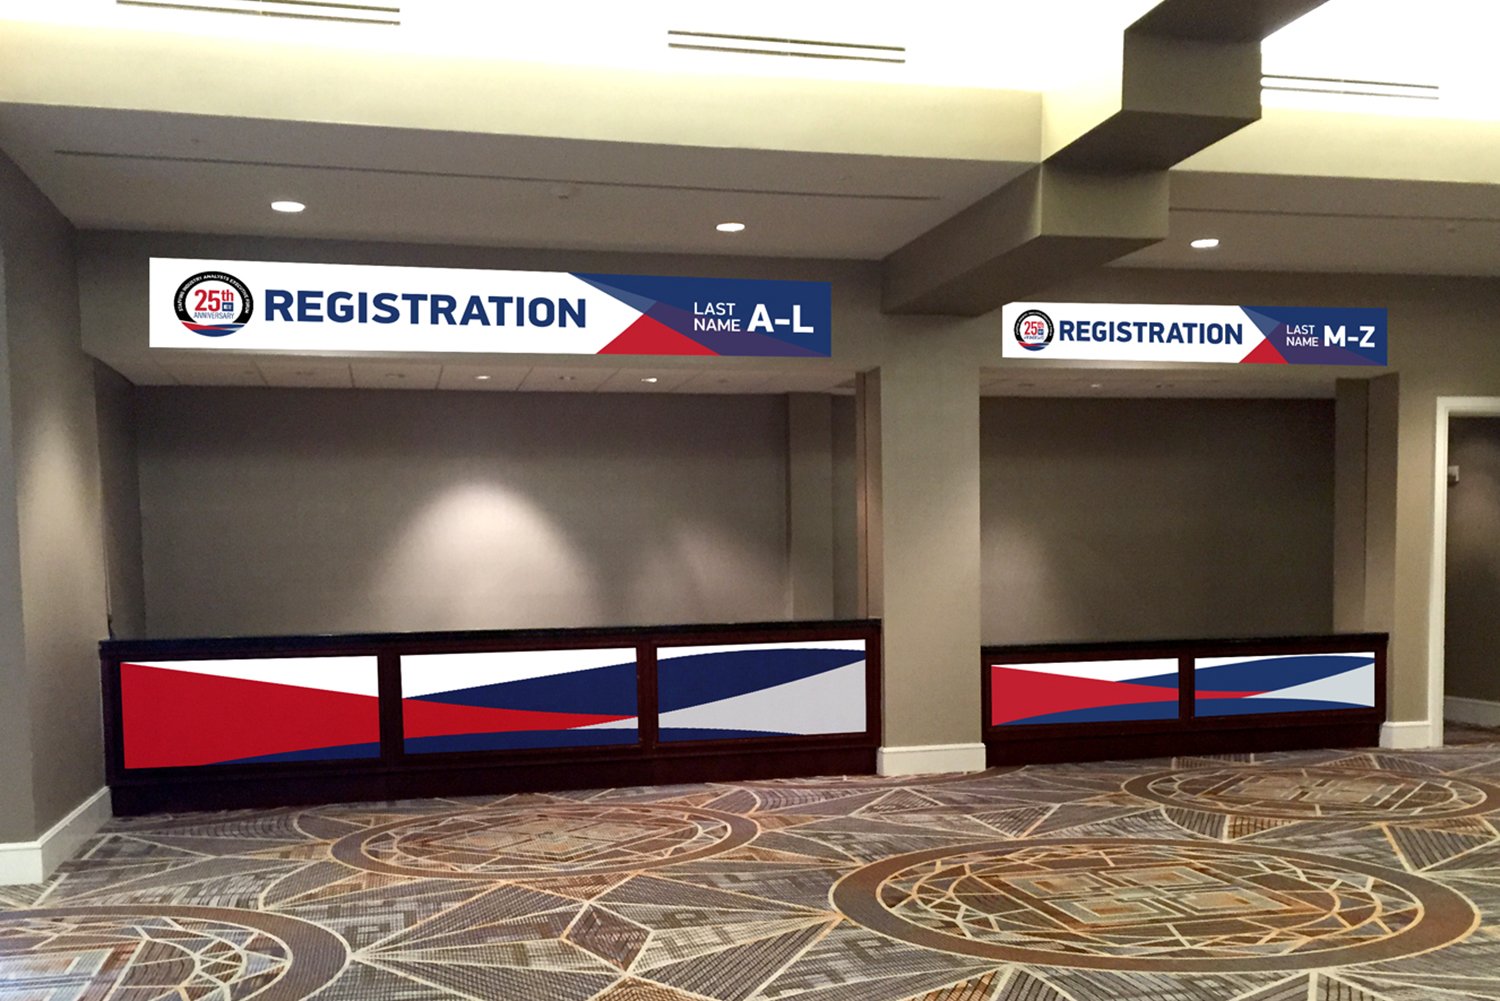   MOCK-UP:  Photoshopped preview of signage panels to approve design of registration booth 